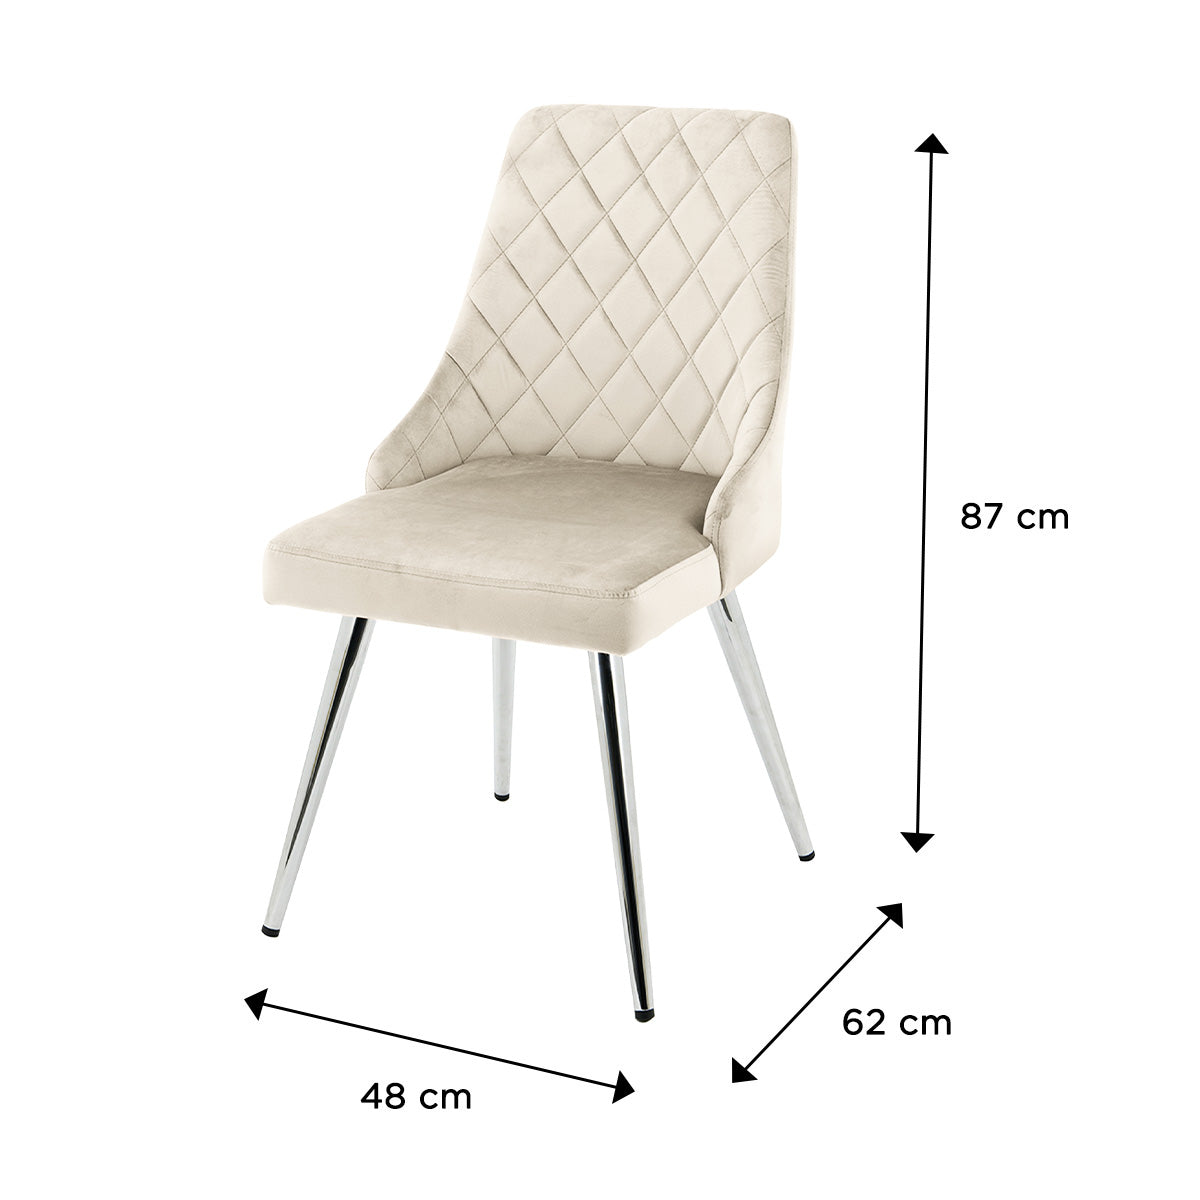 dining chair set